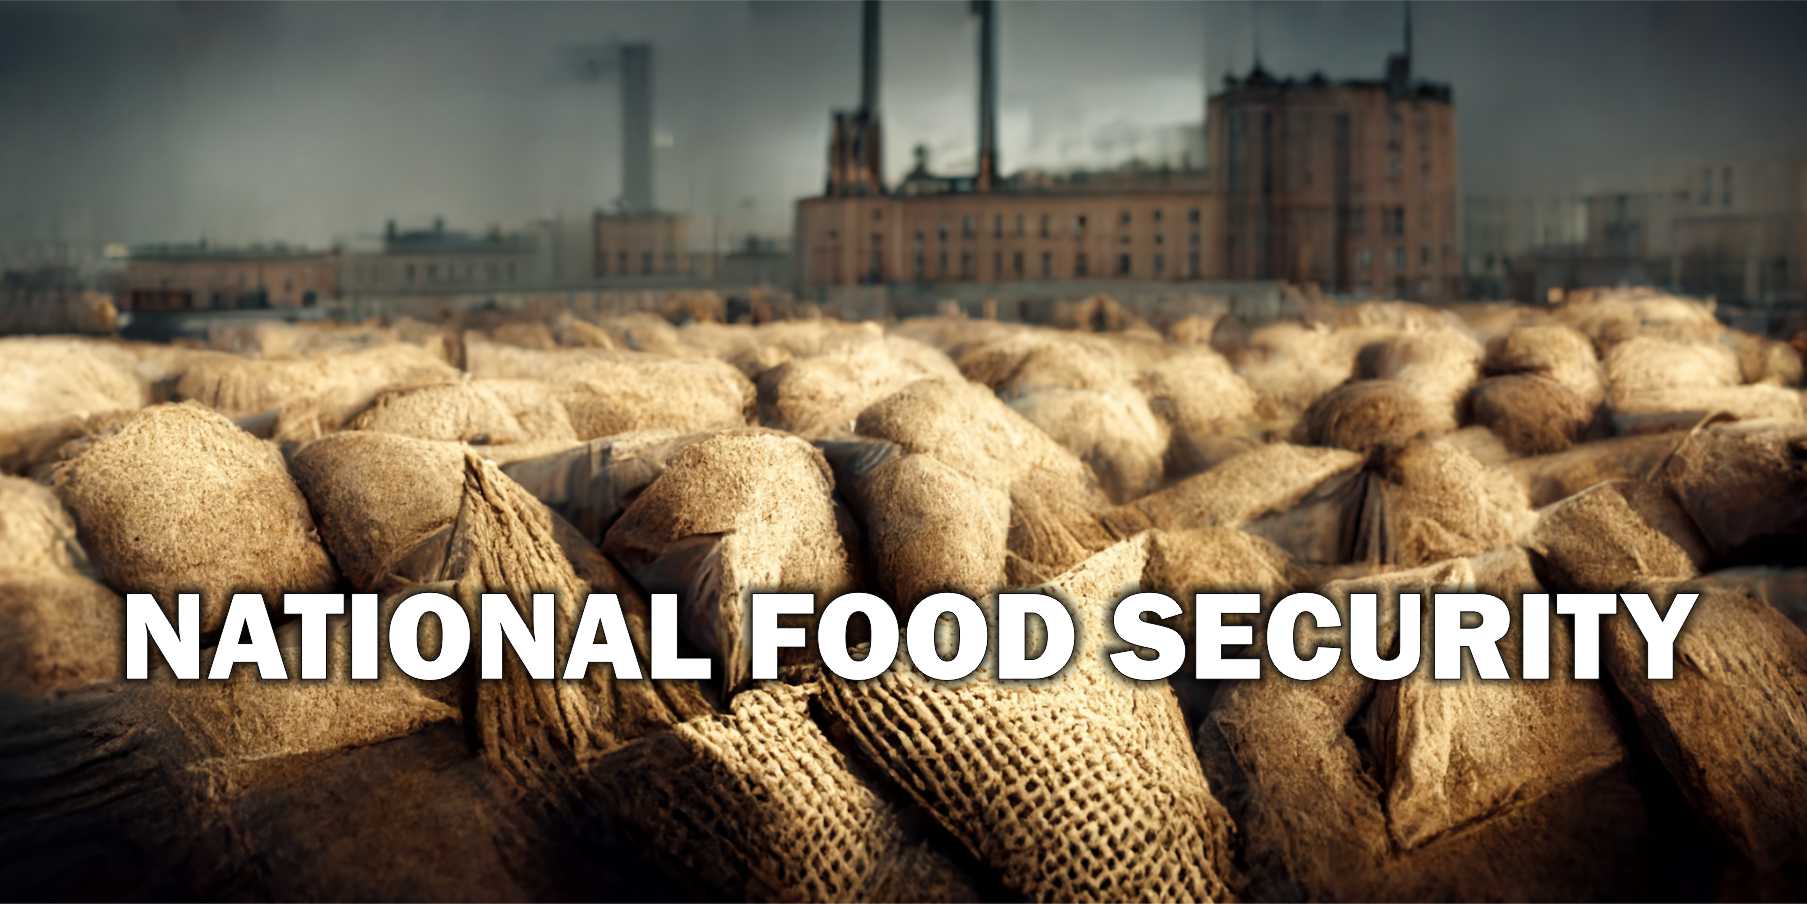 National Food Security - what is it & what does it mean for me